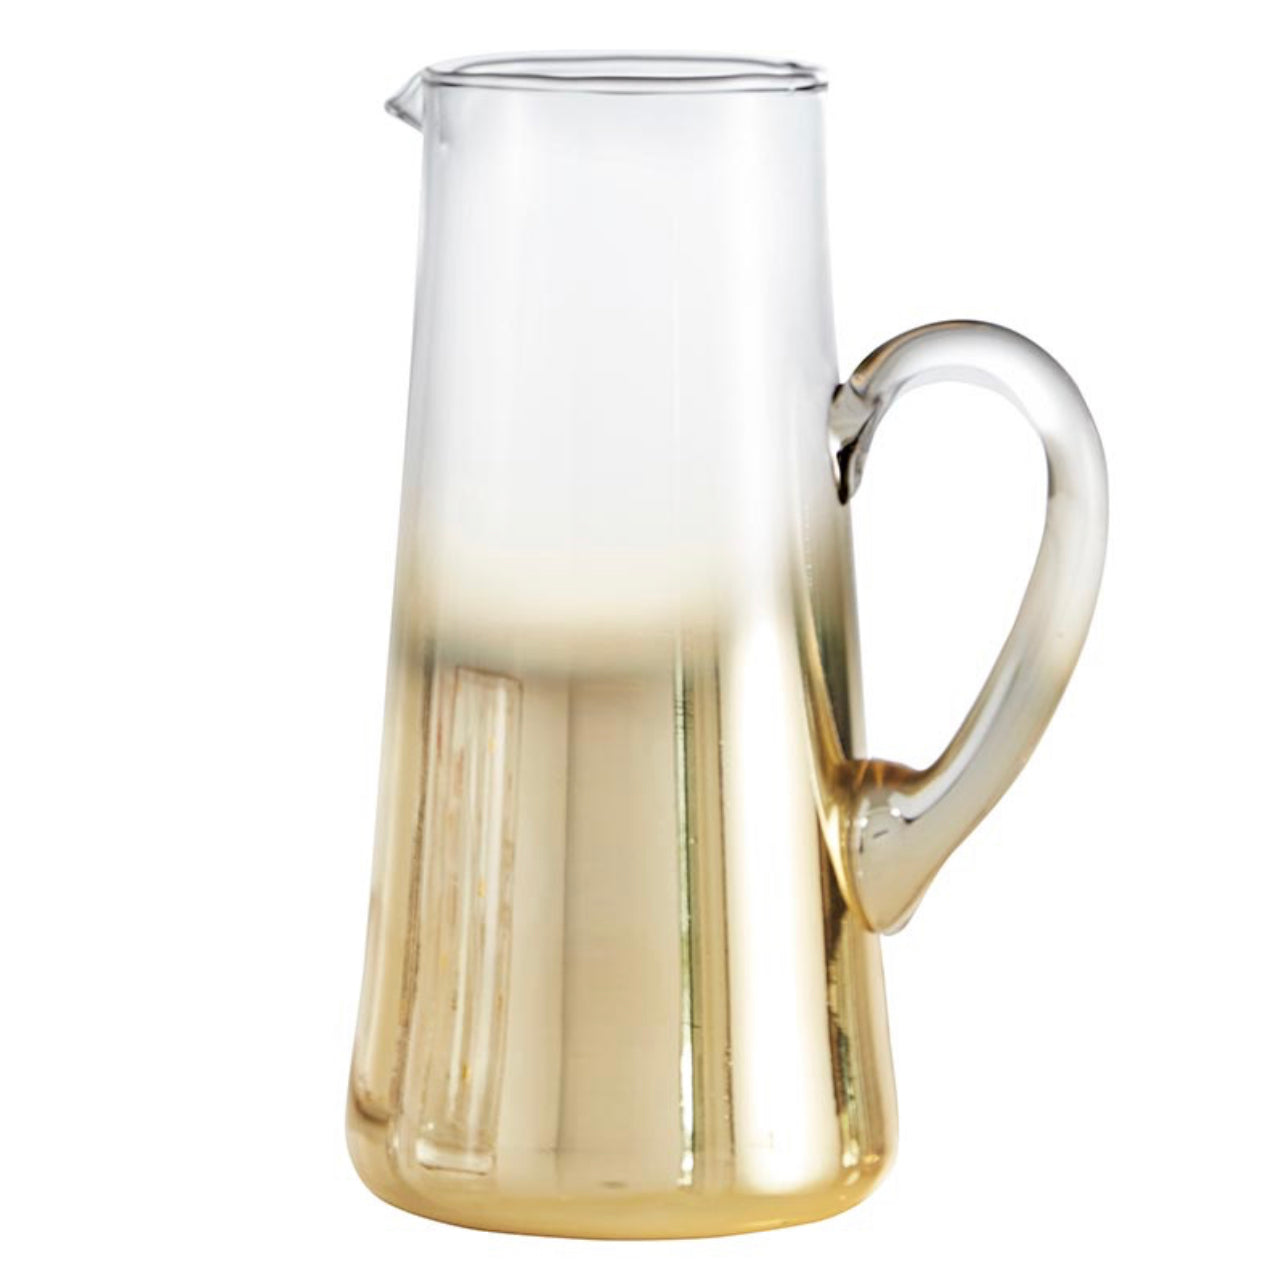 Clear glass pitcher with a metallic gold finish that starts at the bottom and works it's way up the glass in an ombre fashion